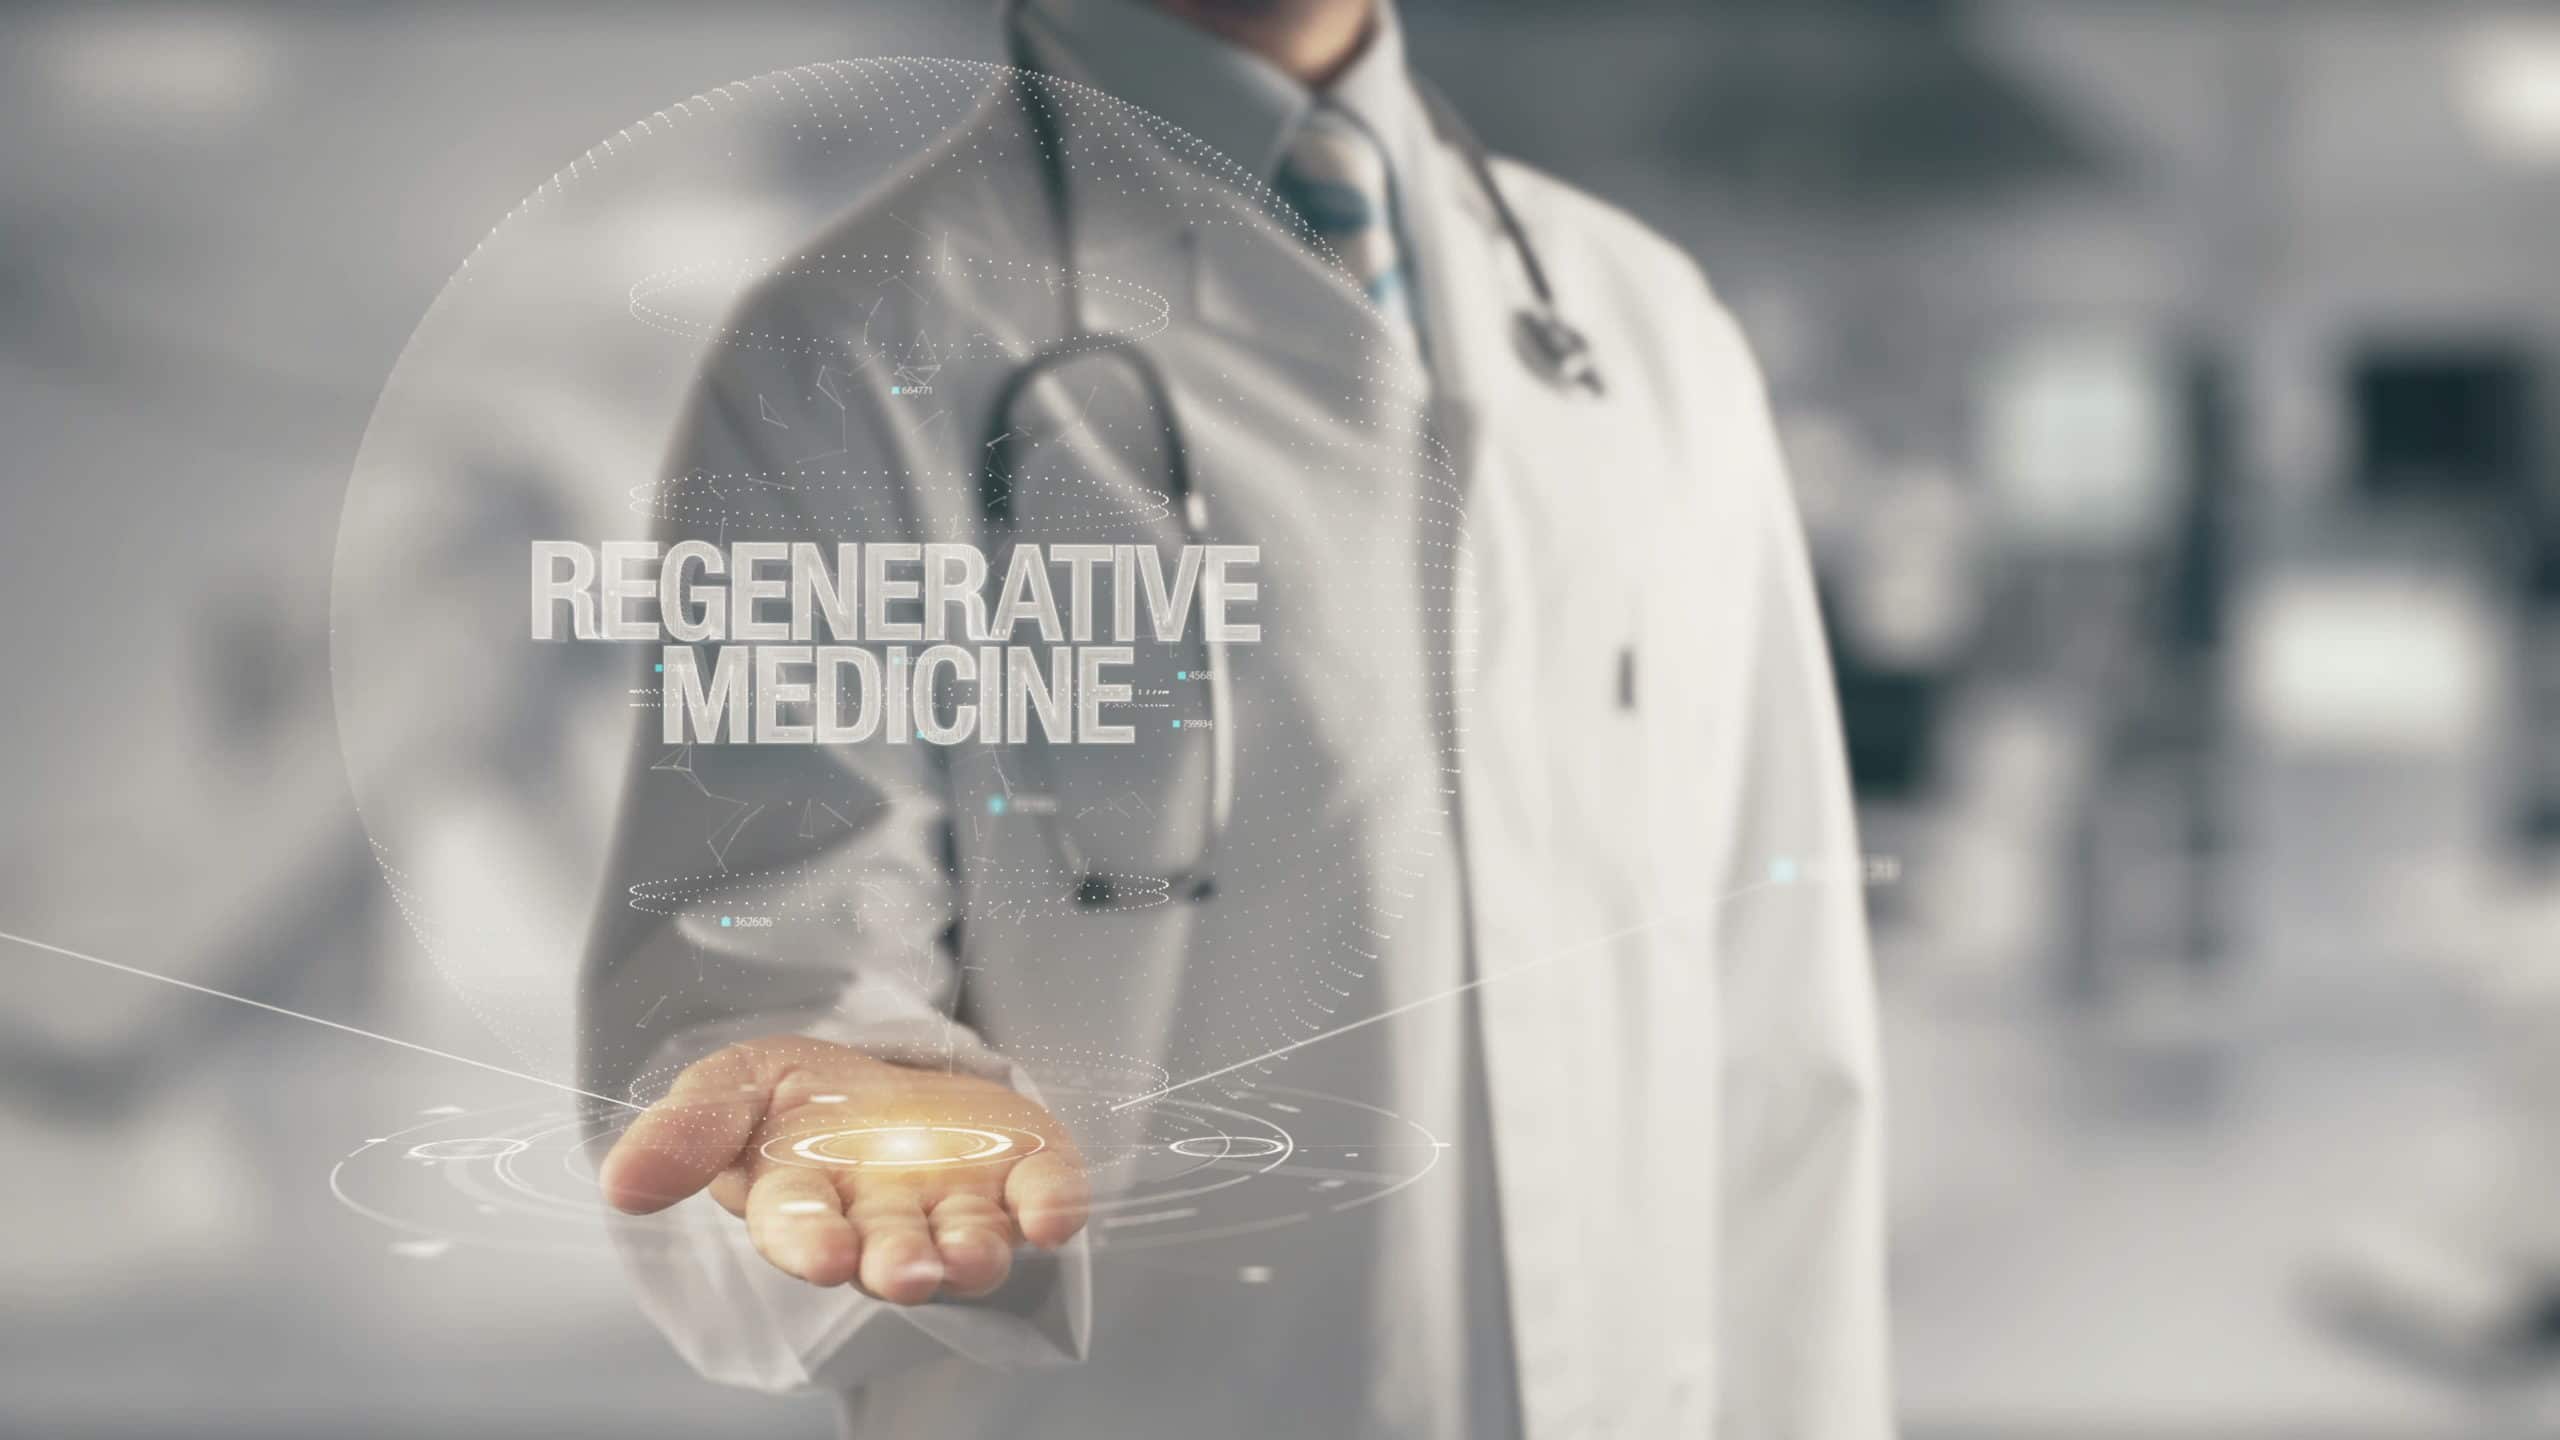 Concept art of a doctor and above his hands shows the text regenerative medicine